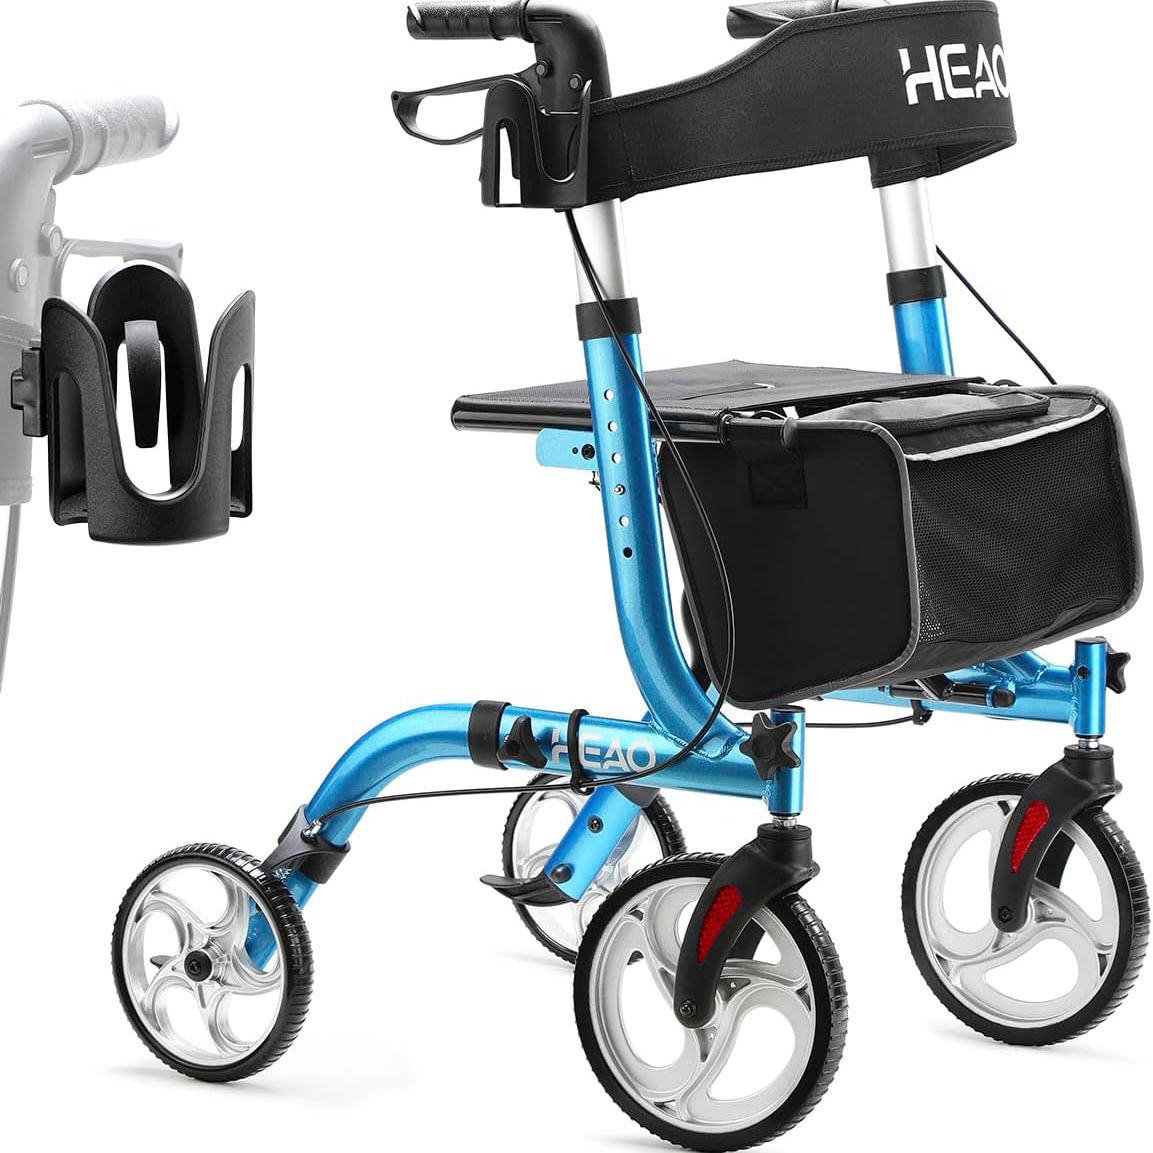 HEAO Rollator Walker for Seniors, Rolling Walkers with Cup Holder and 10" Wheels, Lightweight Mobility Walking Aid with Seat Compact Folding, Blue